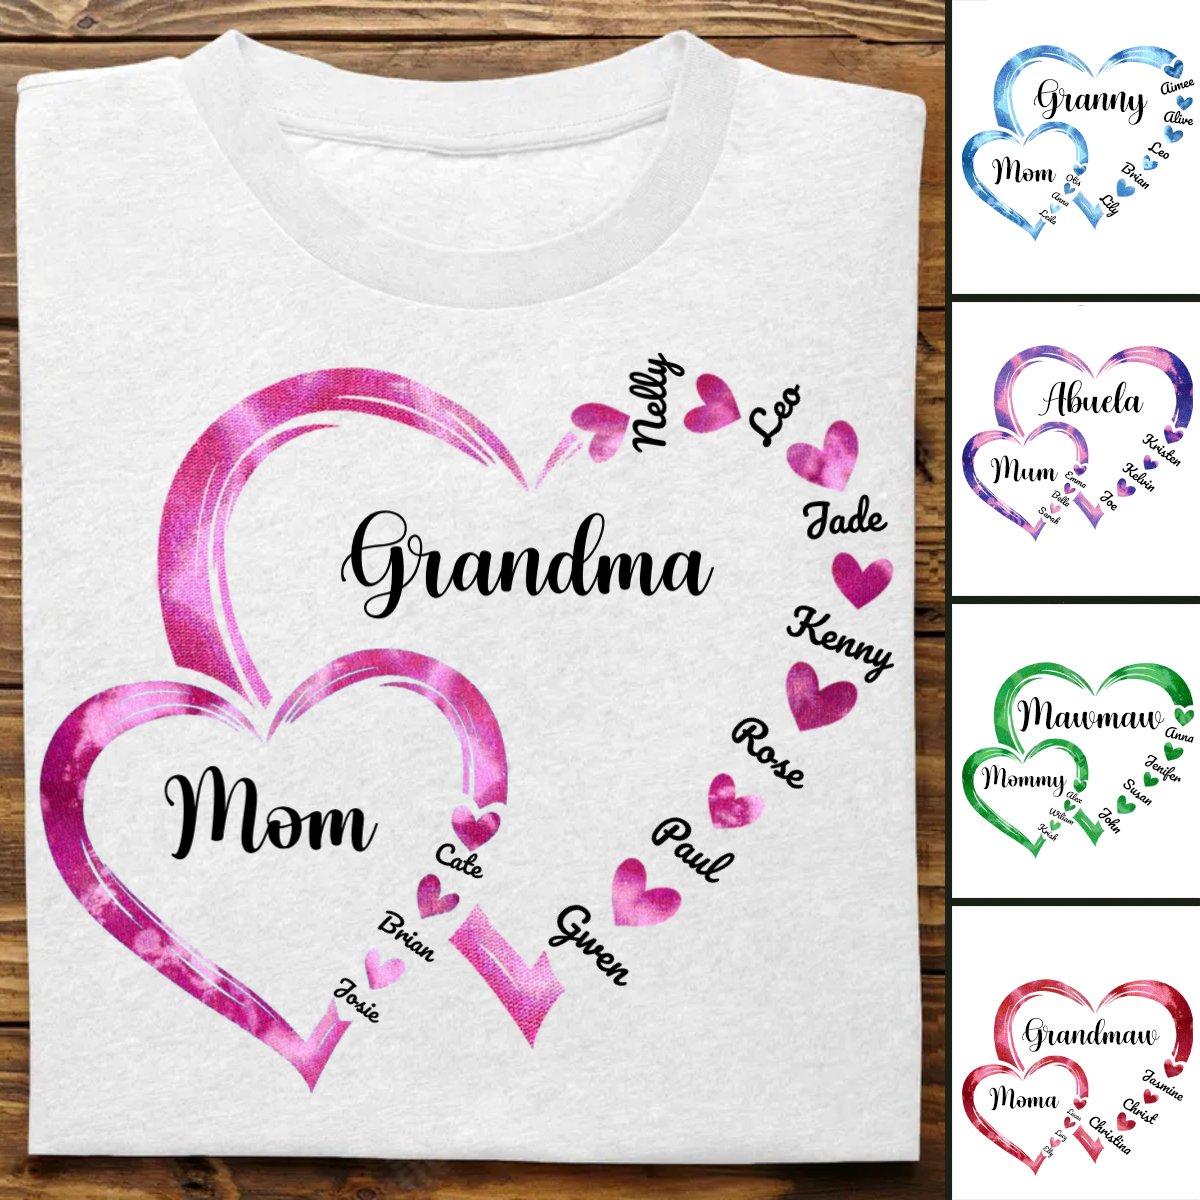 Discover Family - Mom Grandma And Kids Heart - Personalized Unisex T-shirt